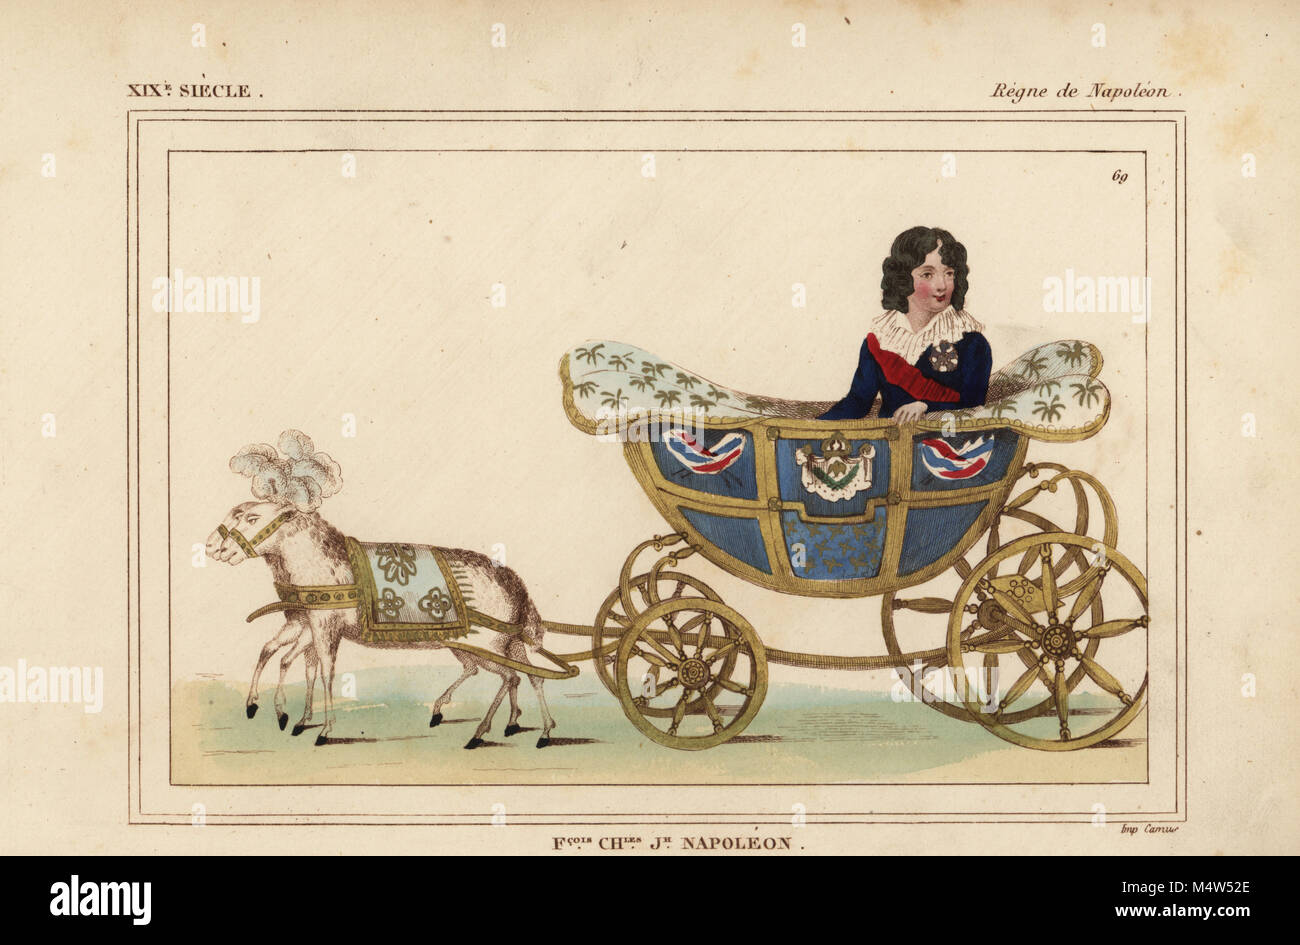 Francois Charles Joseph Napoleon, King of Rome, son of Napoleon and Marie Louise 1811-1832. Wearing the sash of the Legion d'honneur and riding In a miniature carriage. Handcoloured lithograph from Le Bibliophile Jacob aka Paul Lacroix's Costumes Historiques de la France (Historical Costumes of France), Administration de Librairie, Paris, 1852. Stock Photo